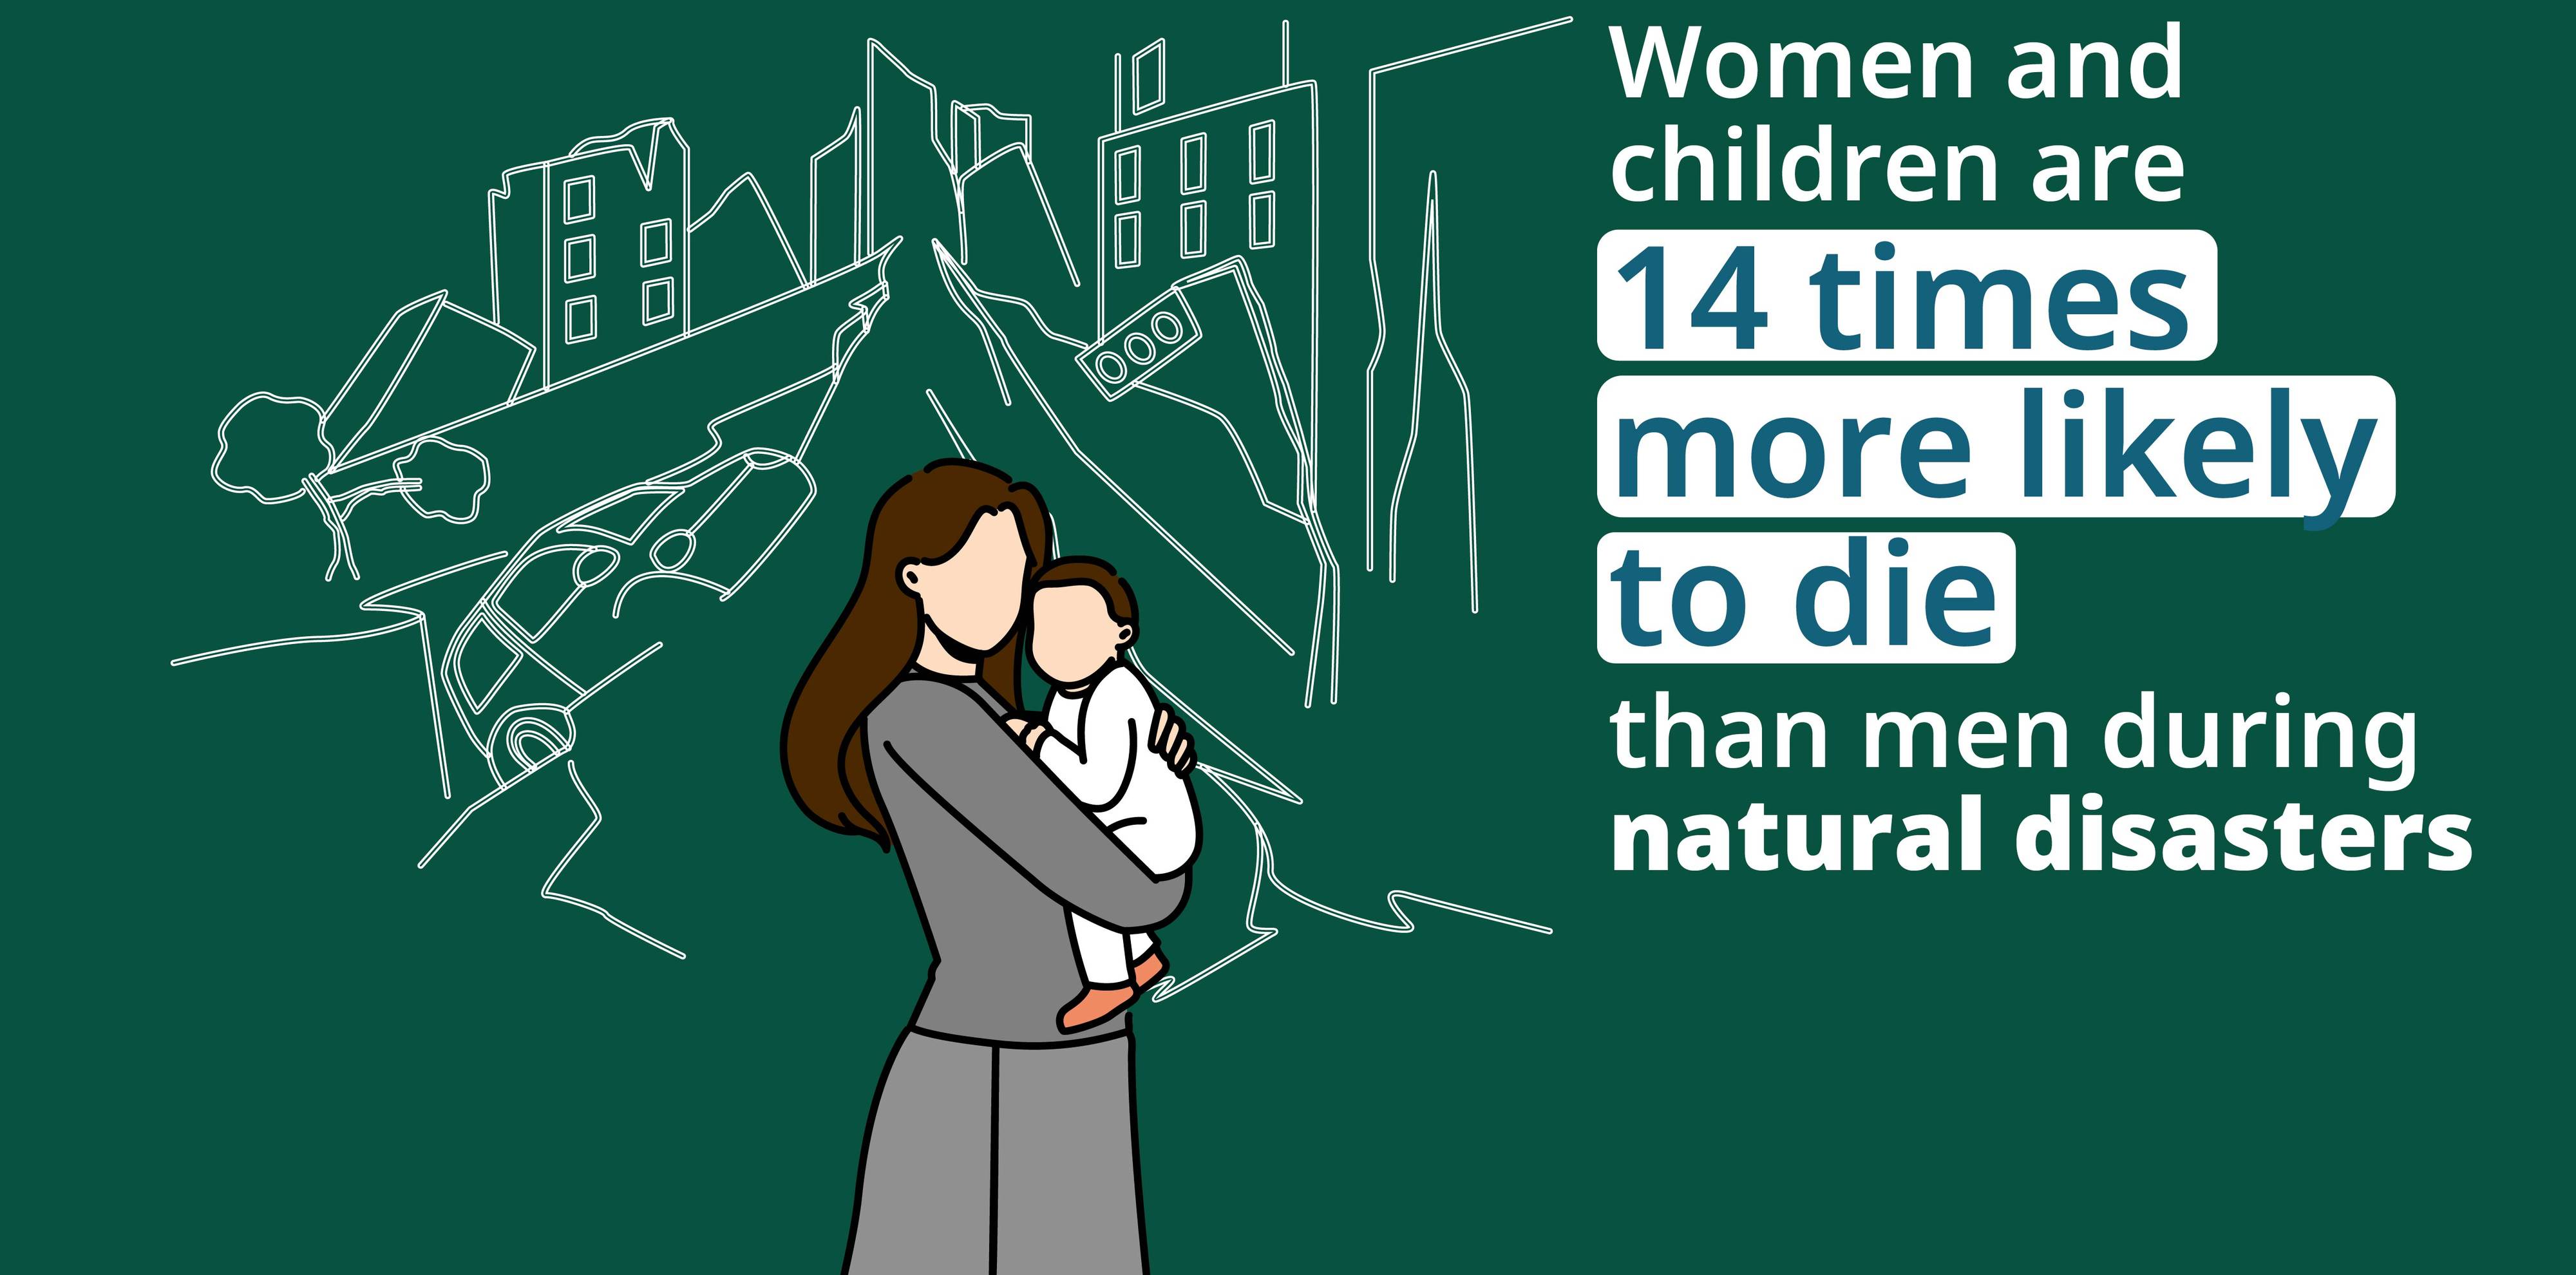 To make the world more climate-resilient empower women